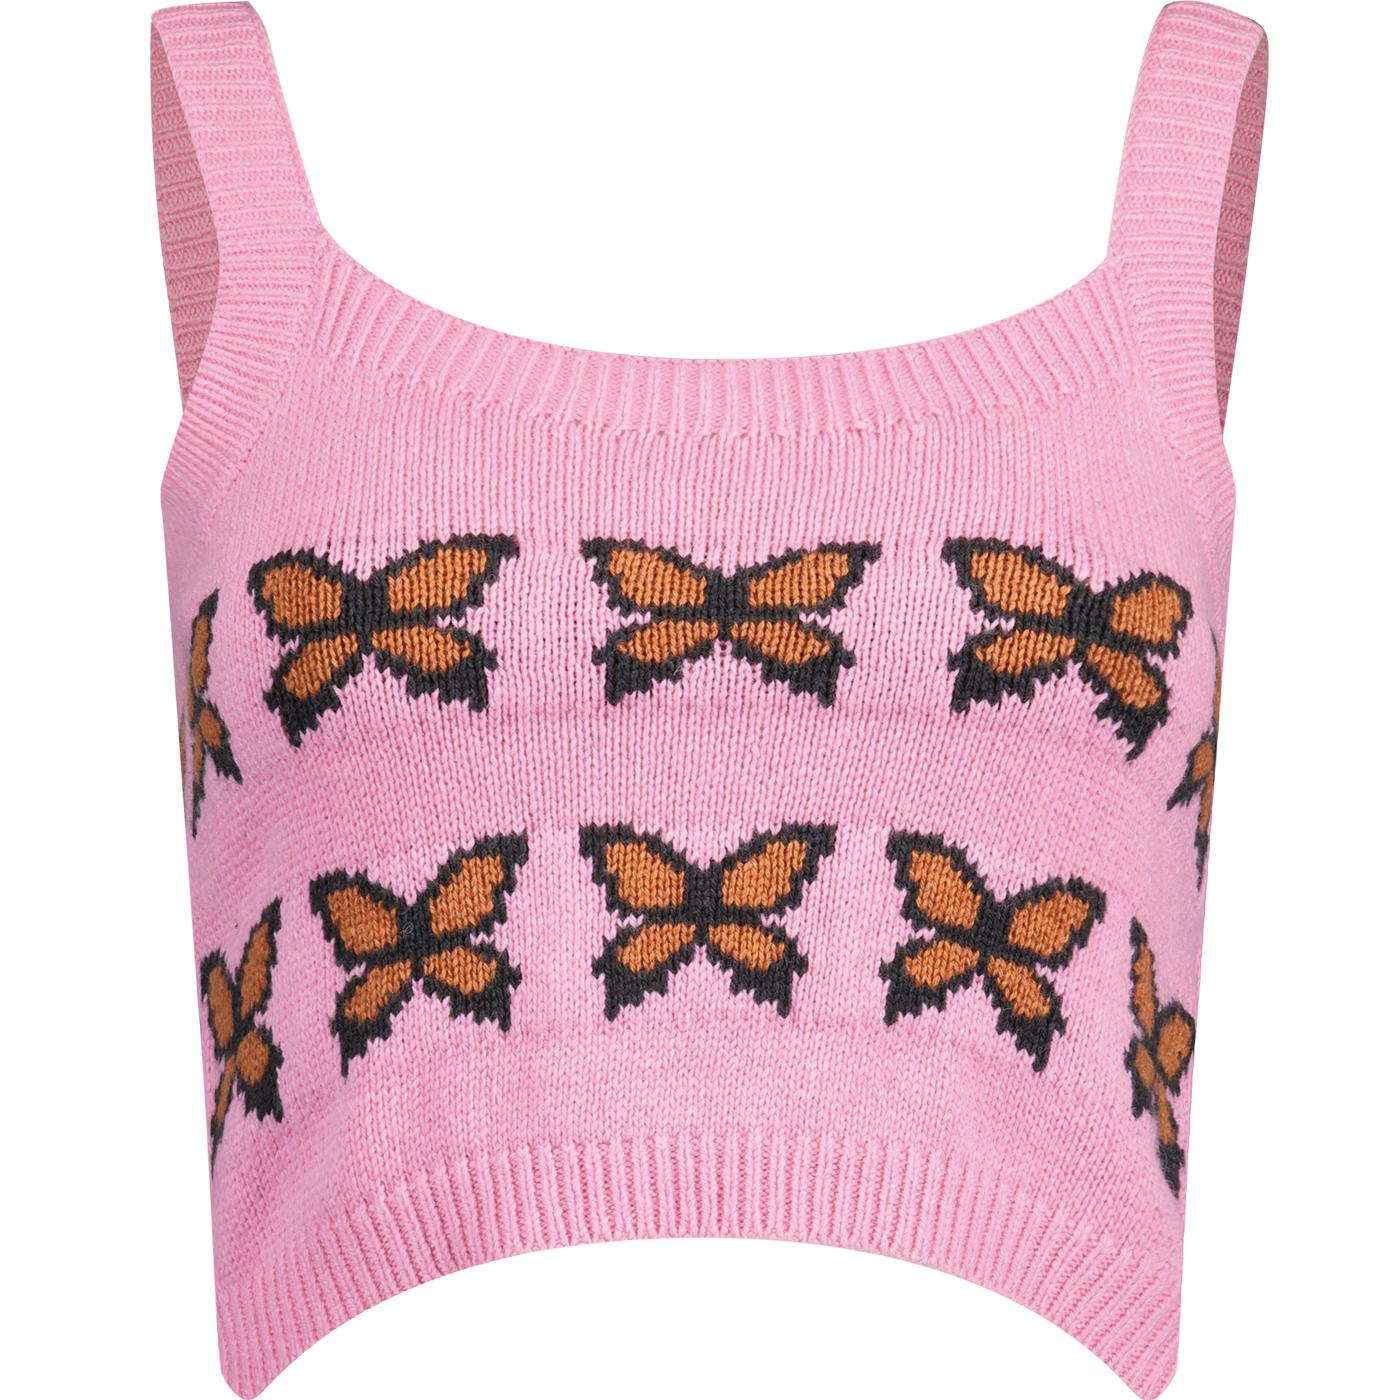 LEVI'S® Heaven Retro Cropped Sweater Tank Top PINK